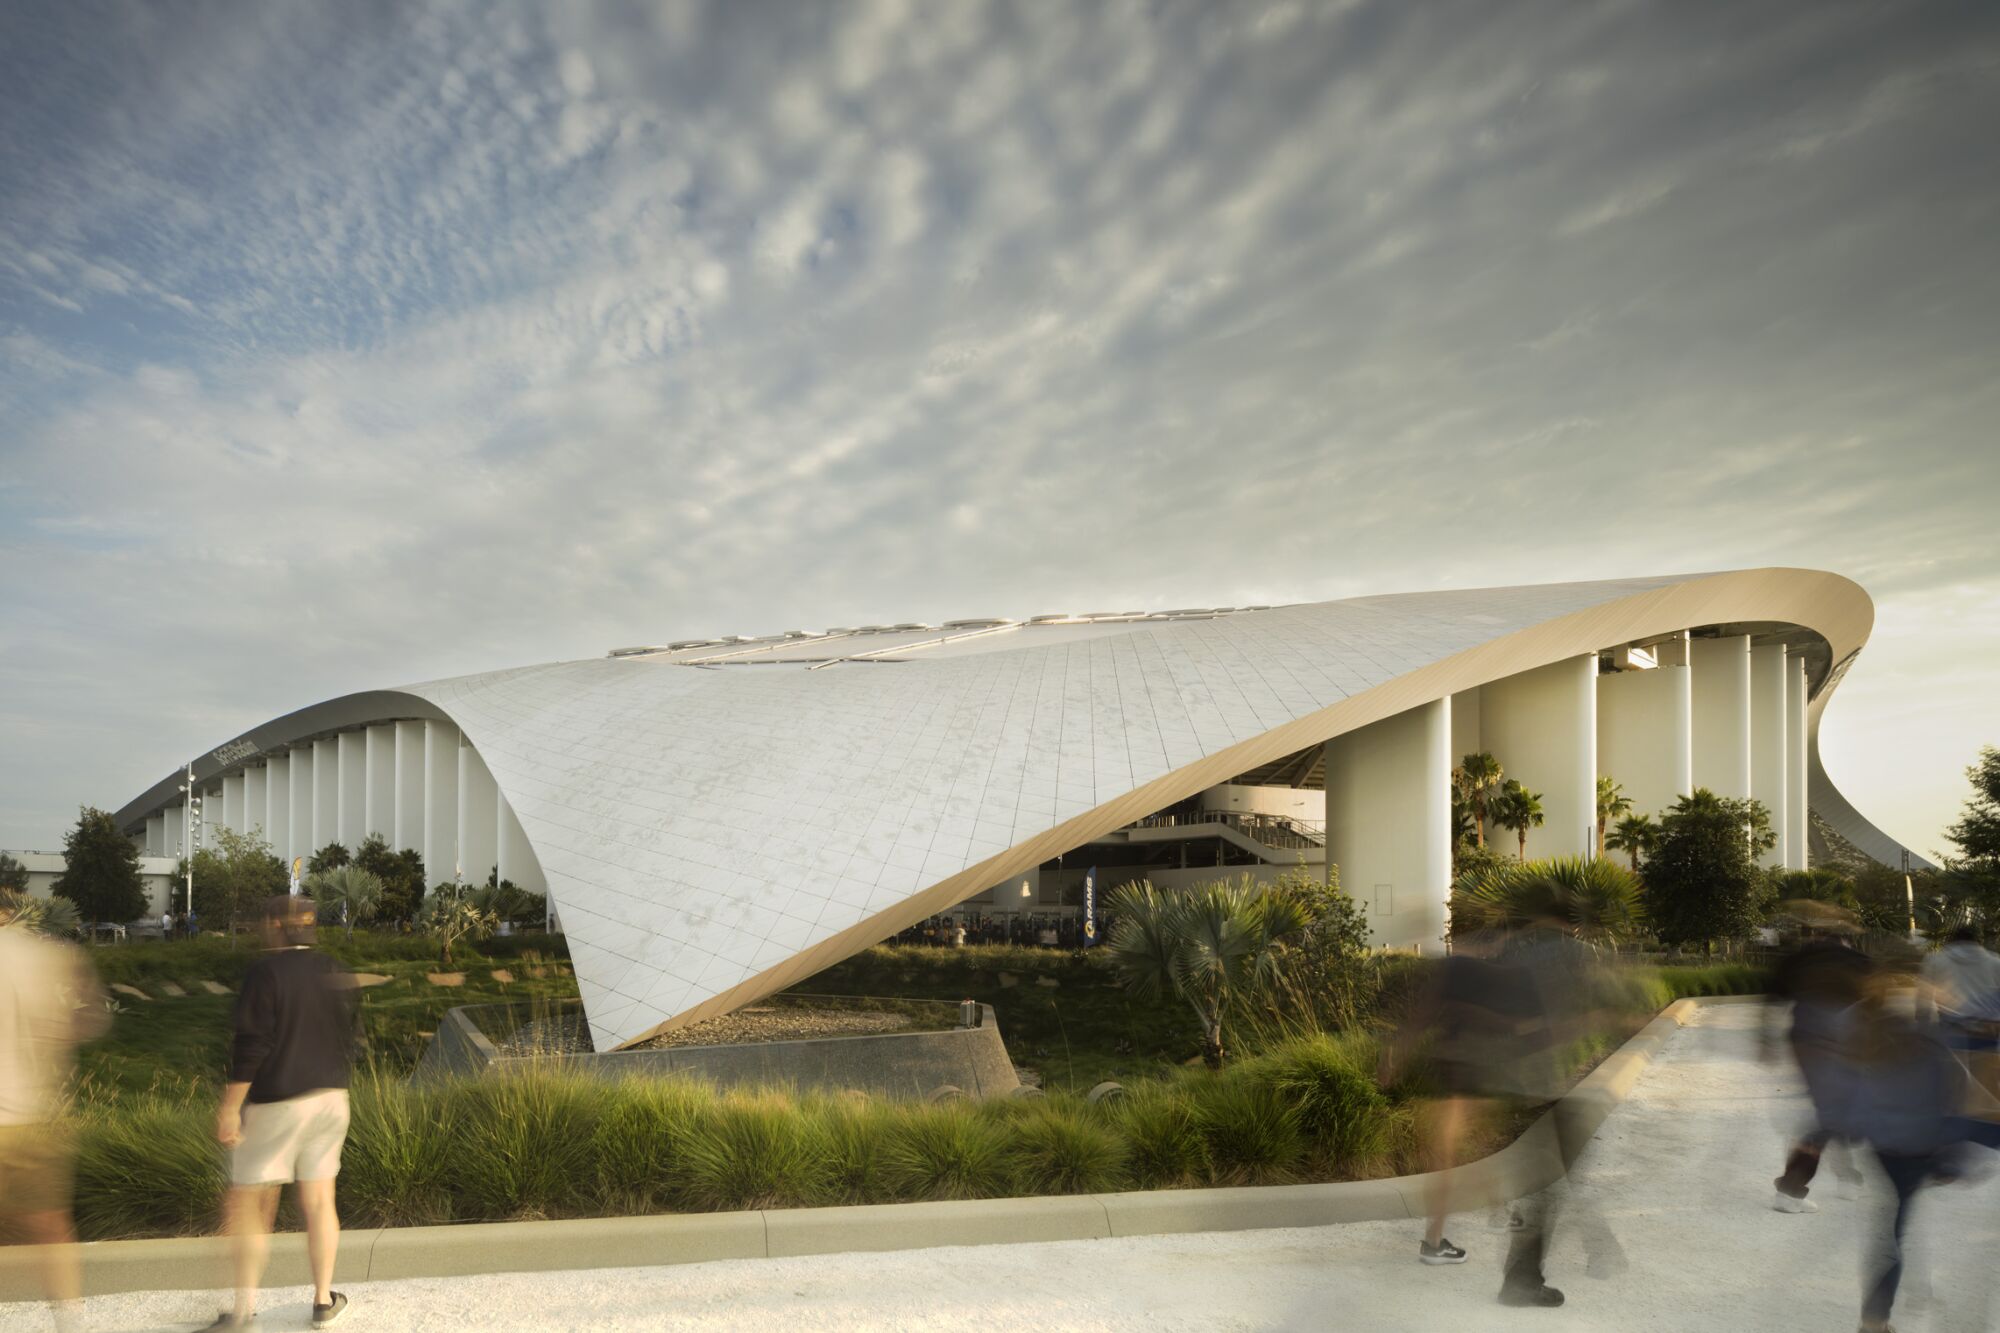 A side view of SoFi shows the curving roof touching down into a point amid landscape.